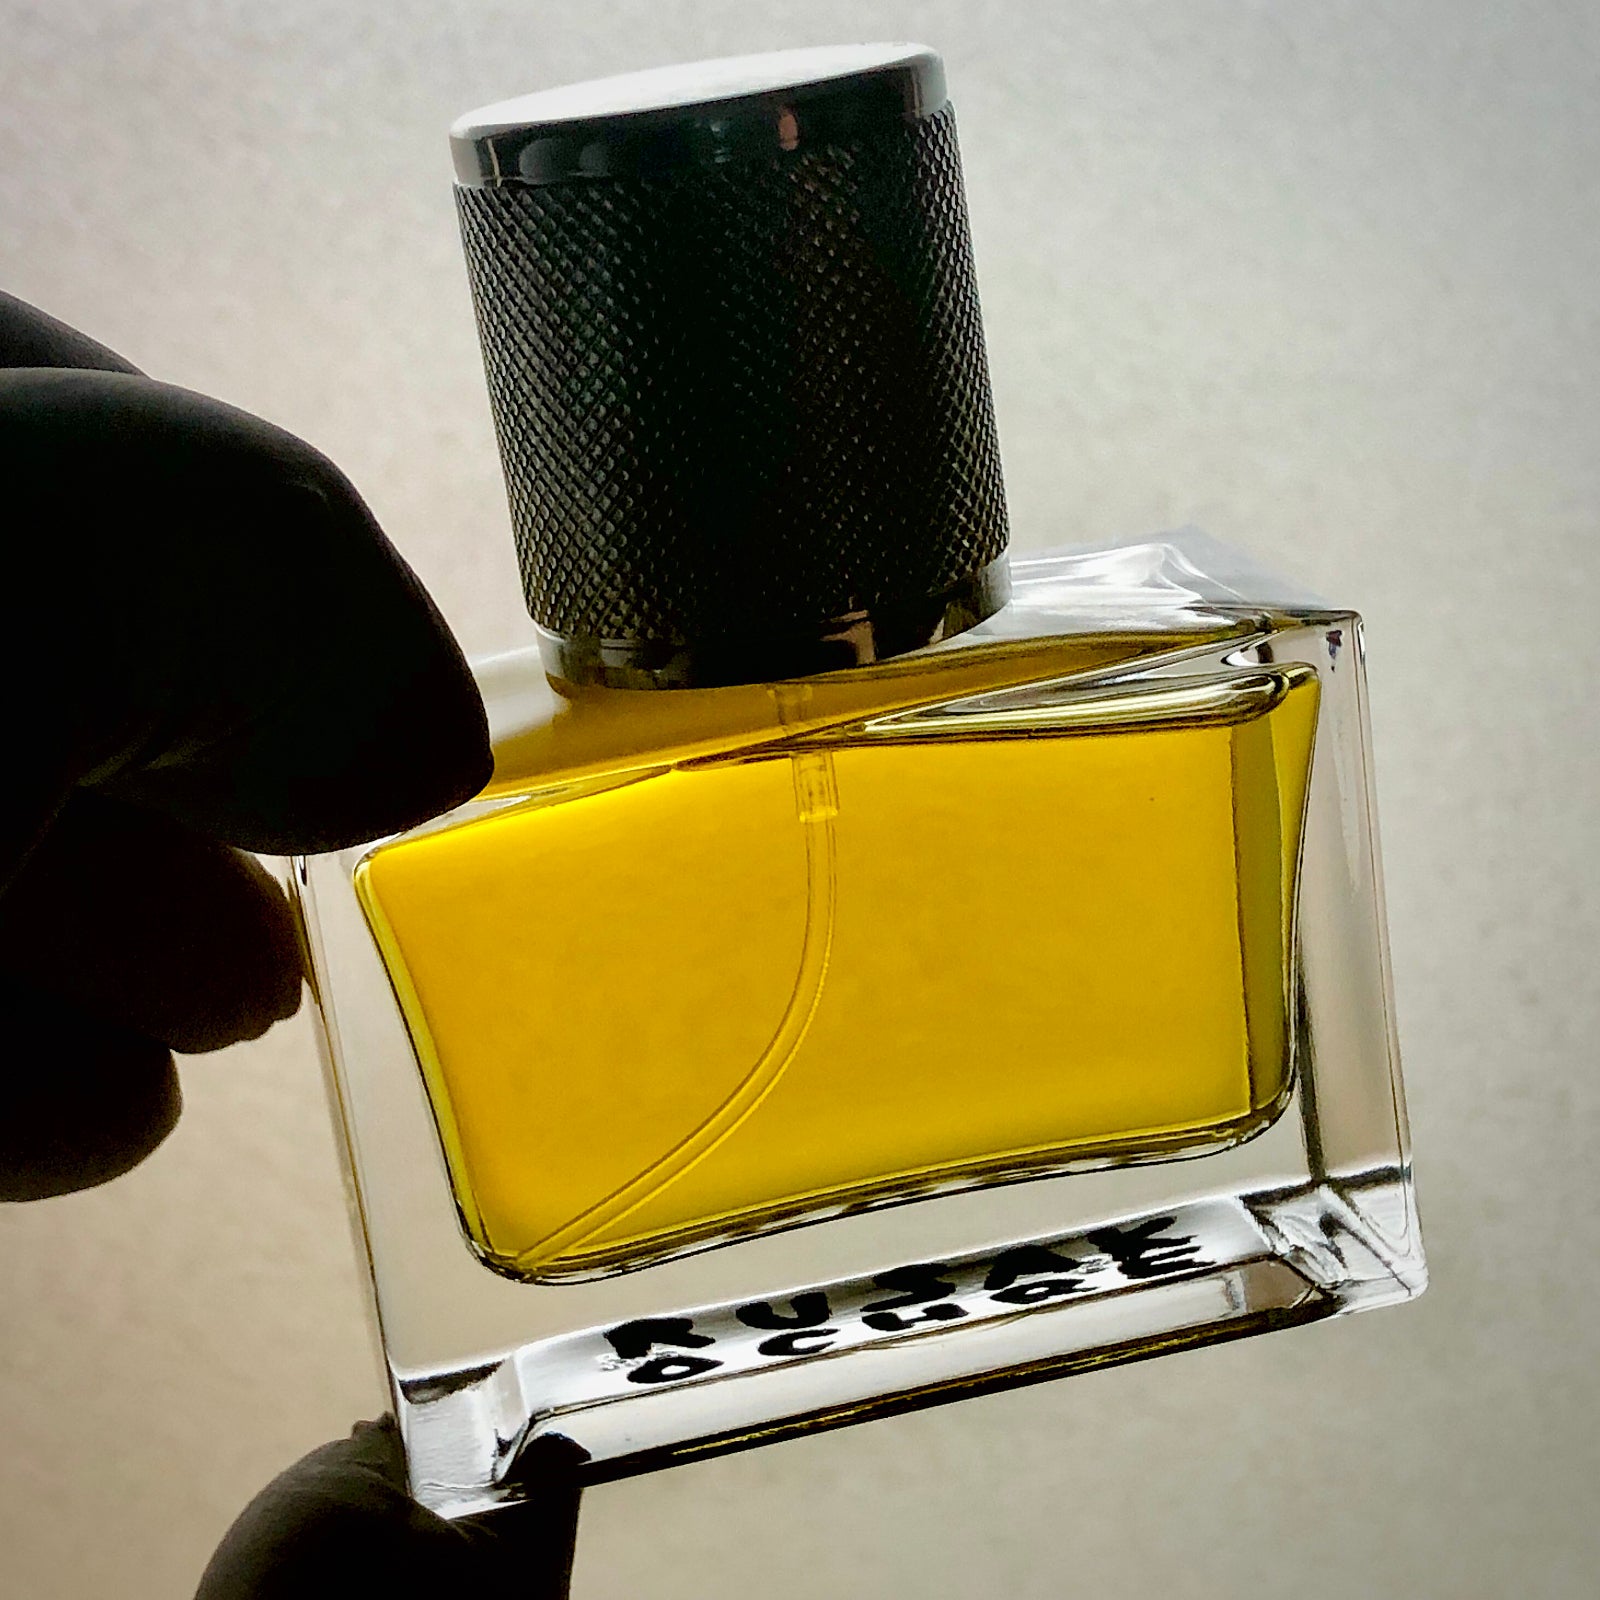 Perfume bottle with ochre-colored juice, held in a hand, backlit.